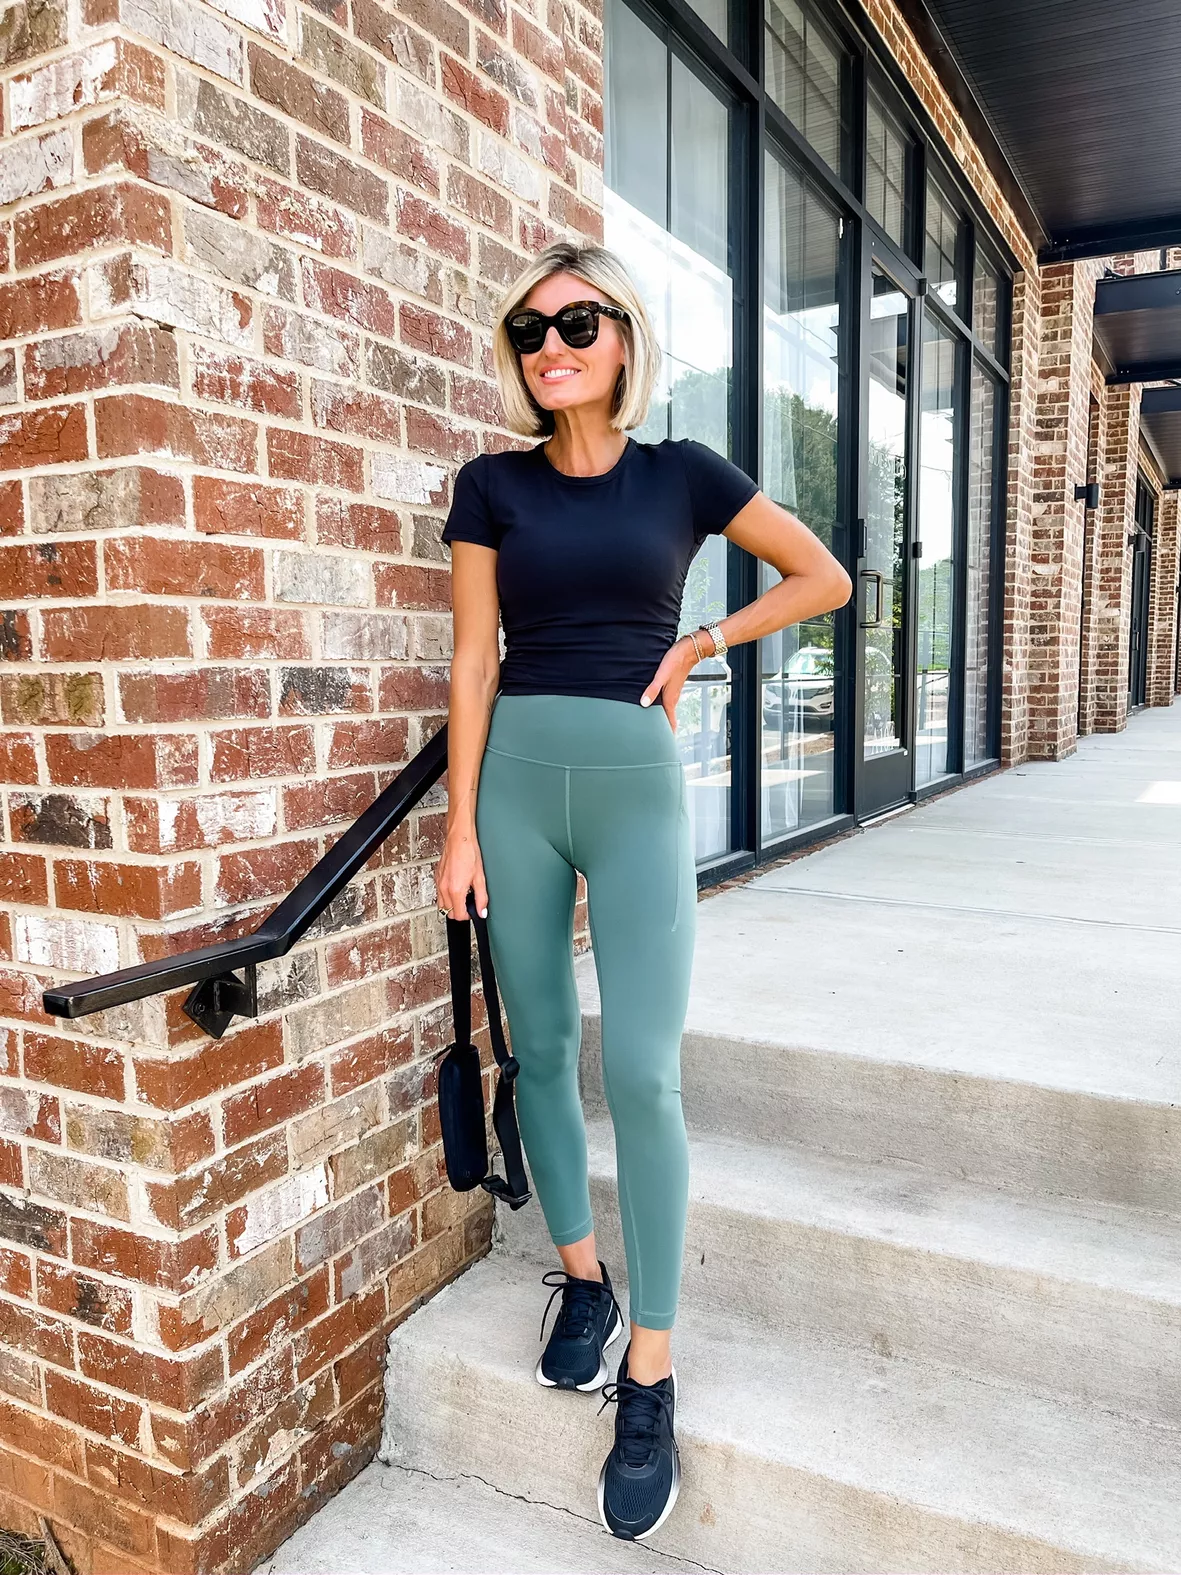 LULULEMON OUTFITS OF THE WEEK